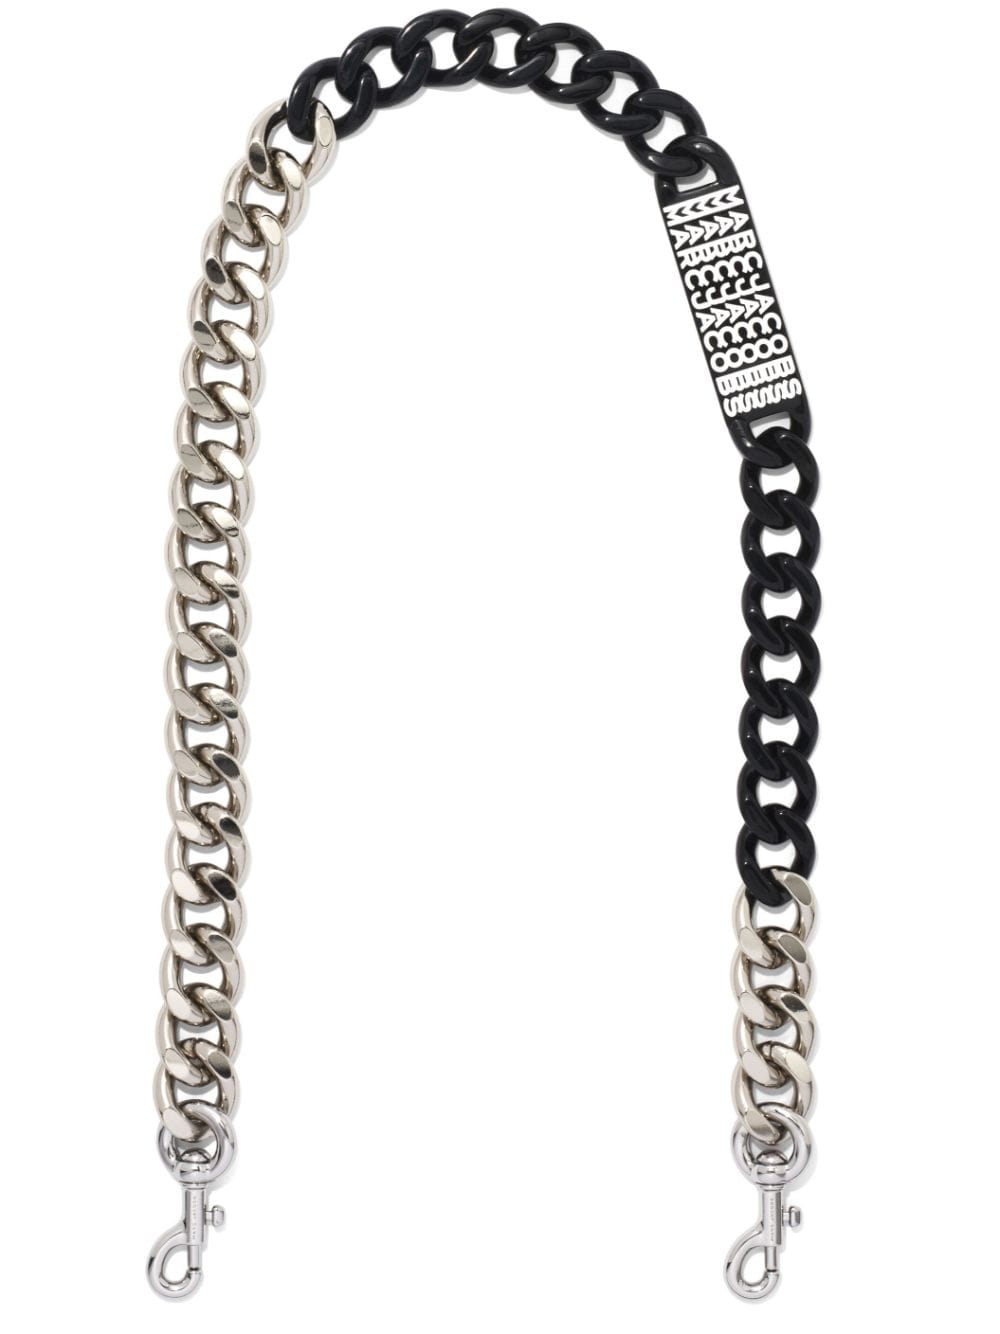 The Barcode Chain shoulder strap